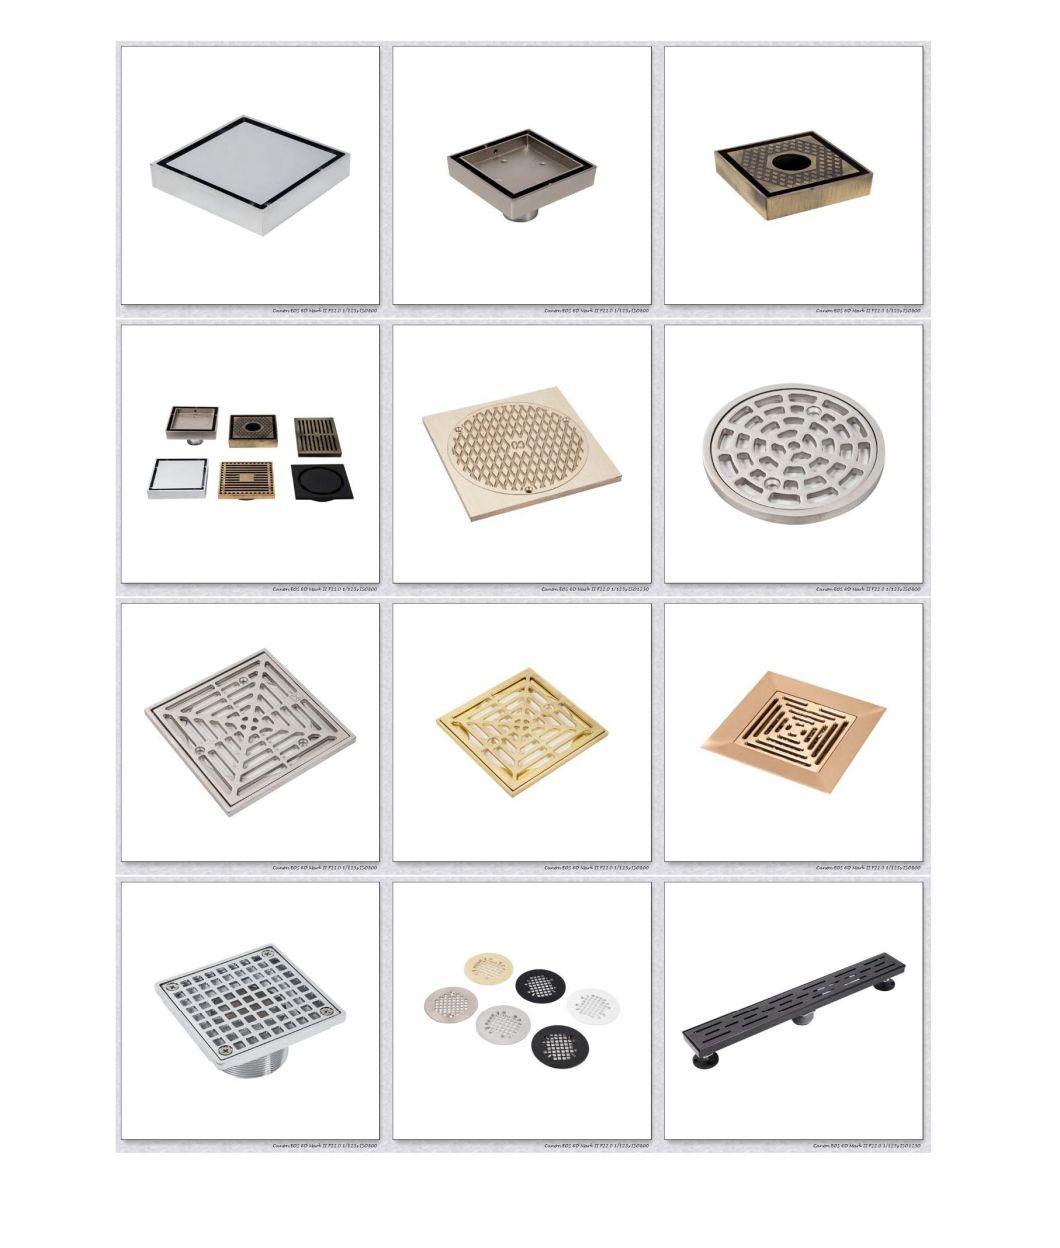 Zinc Alloy Strainer and Shower Drain